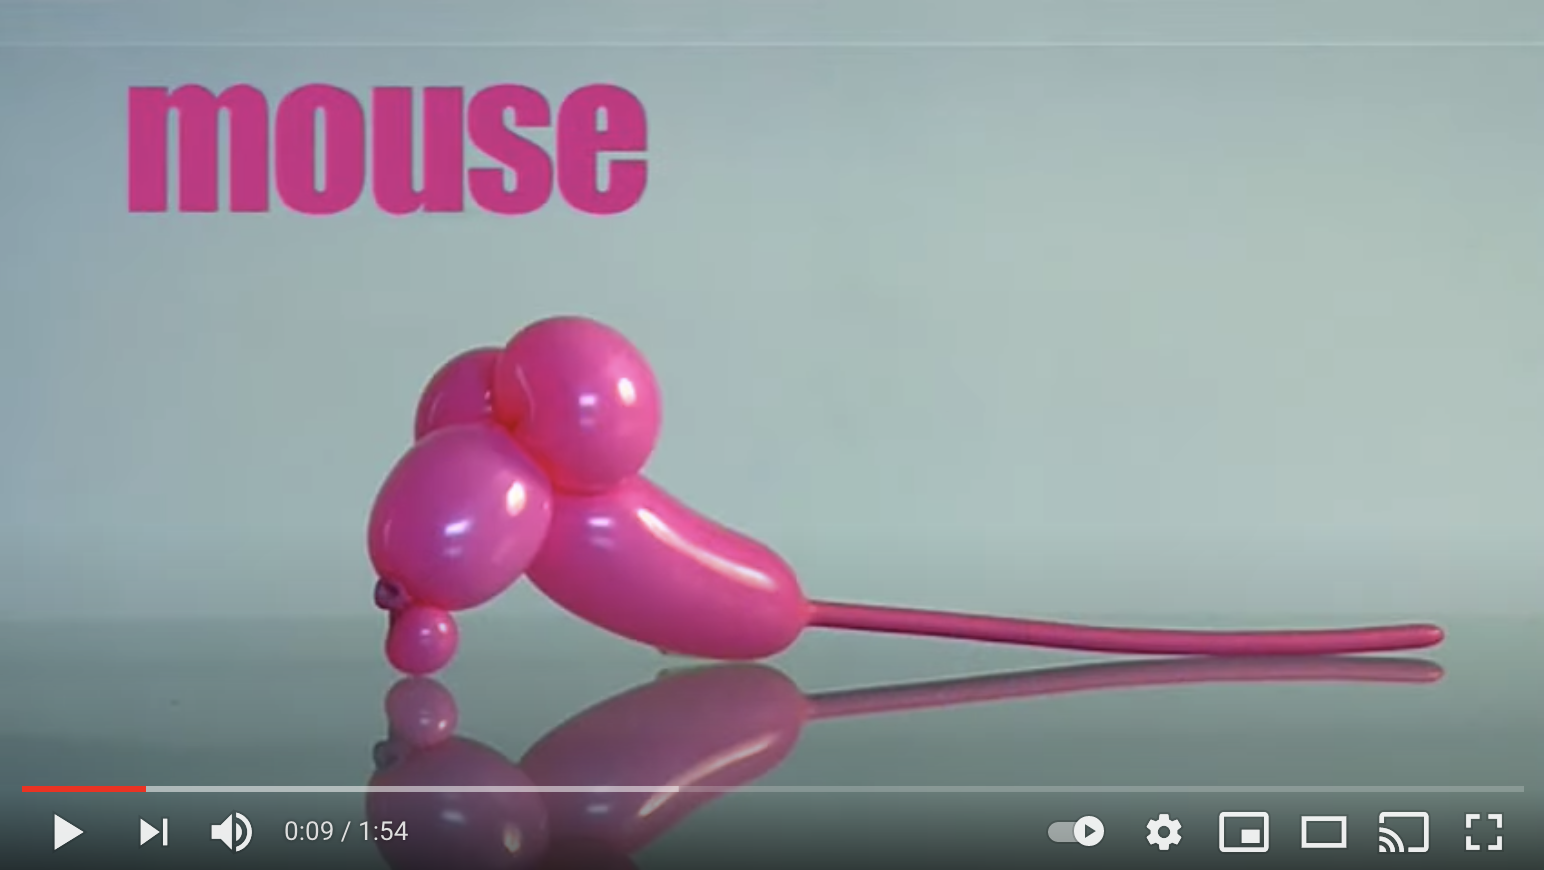 How to make a balloon mouse